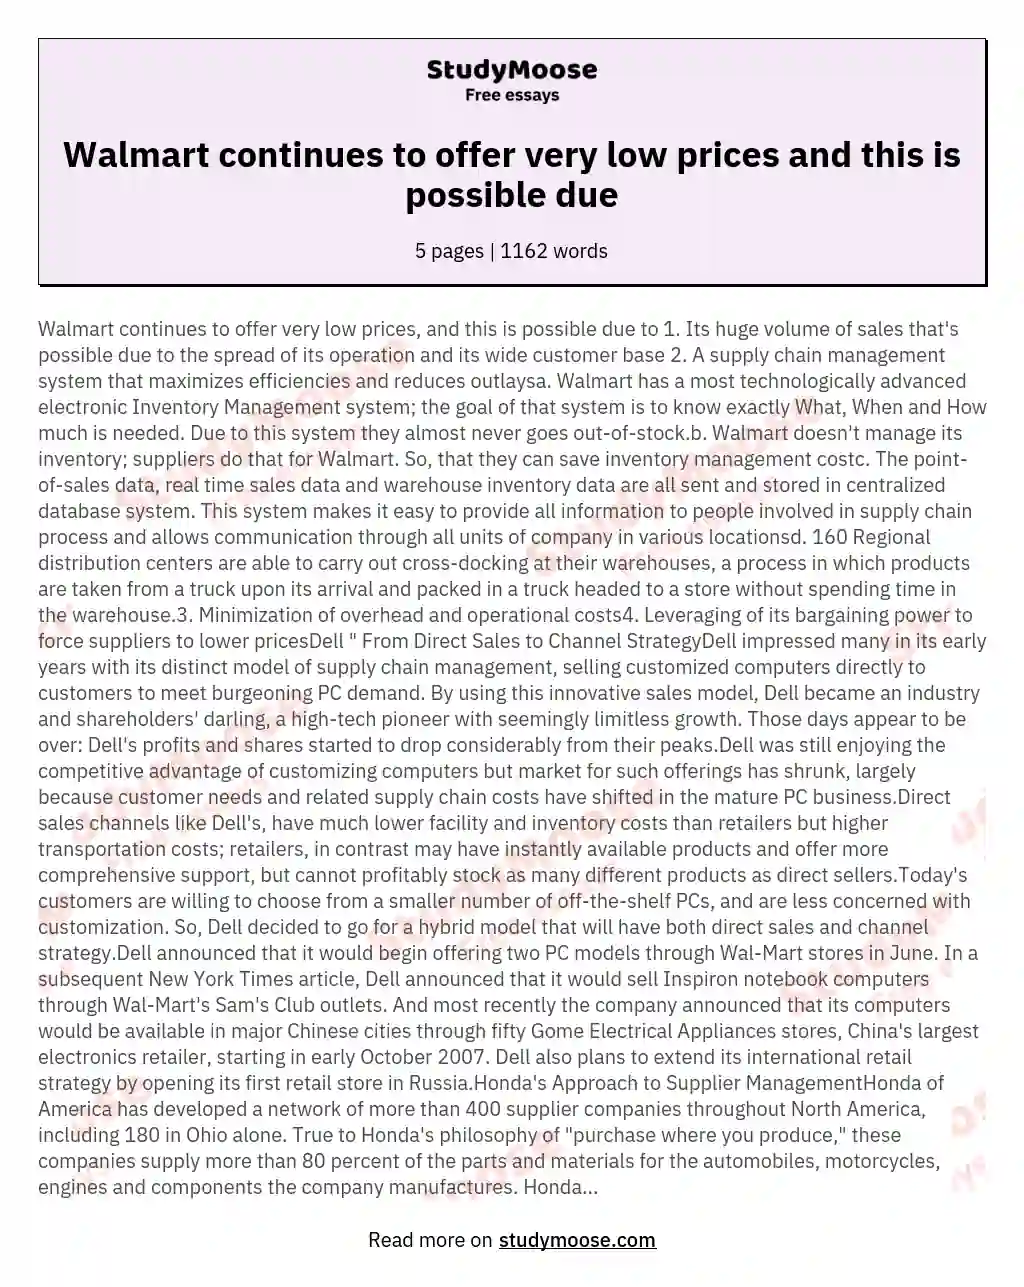 Walmart continues to offer very low prices and this is possible due essay